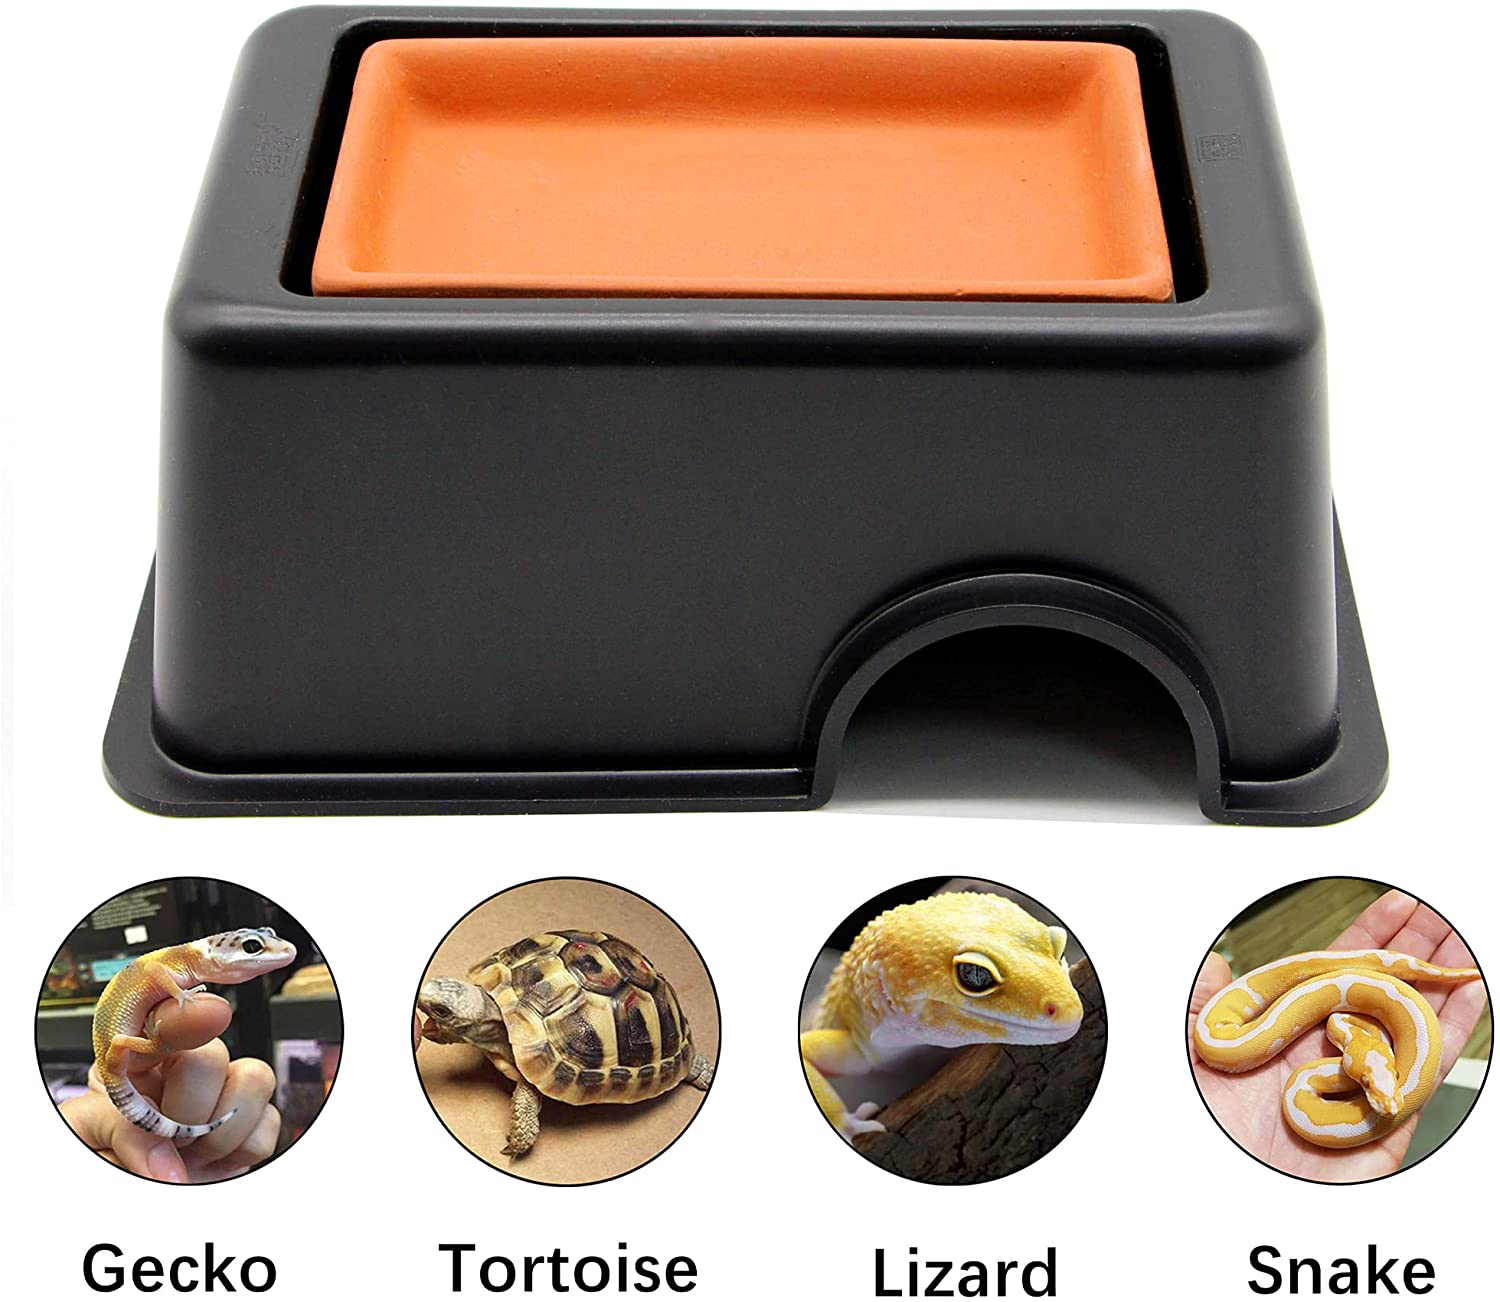 PETWAKEY-ST Reptile Hideout Box，Sink Humidifier Gecko Hide Hut Cave Accessories & Vine Habitat Decor for Small Snake Spiders Frog Turtles Lizards Turtles